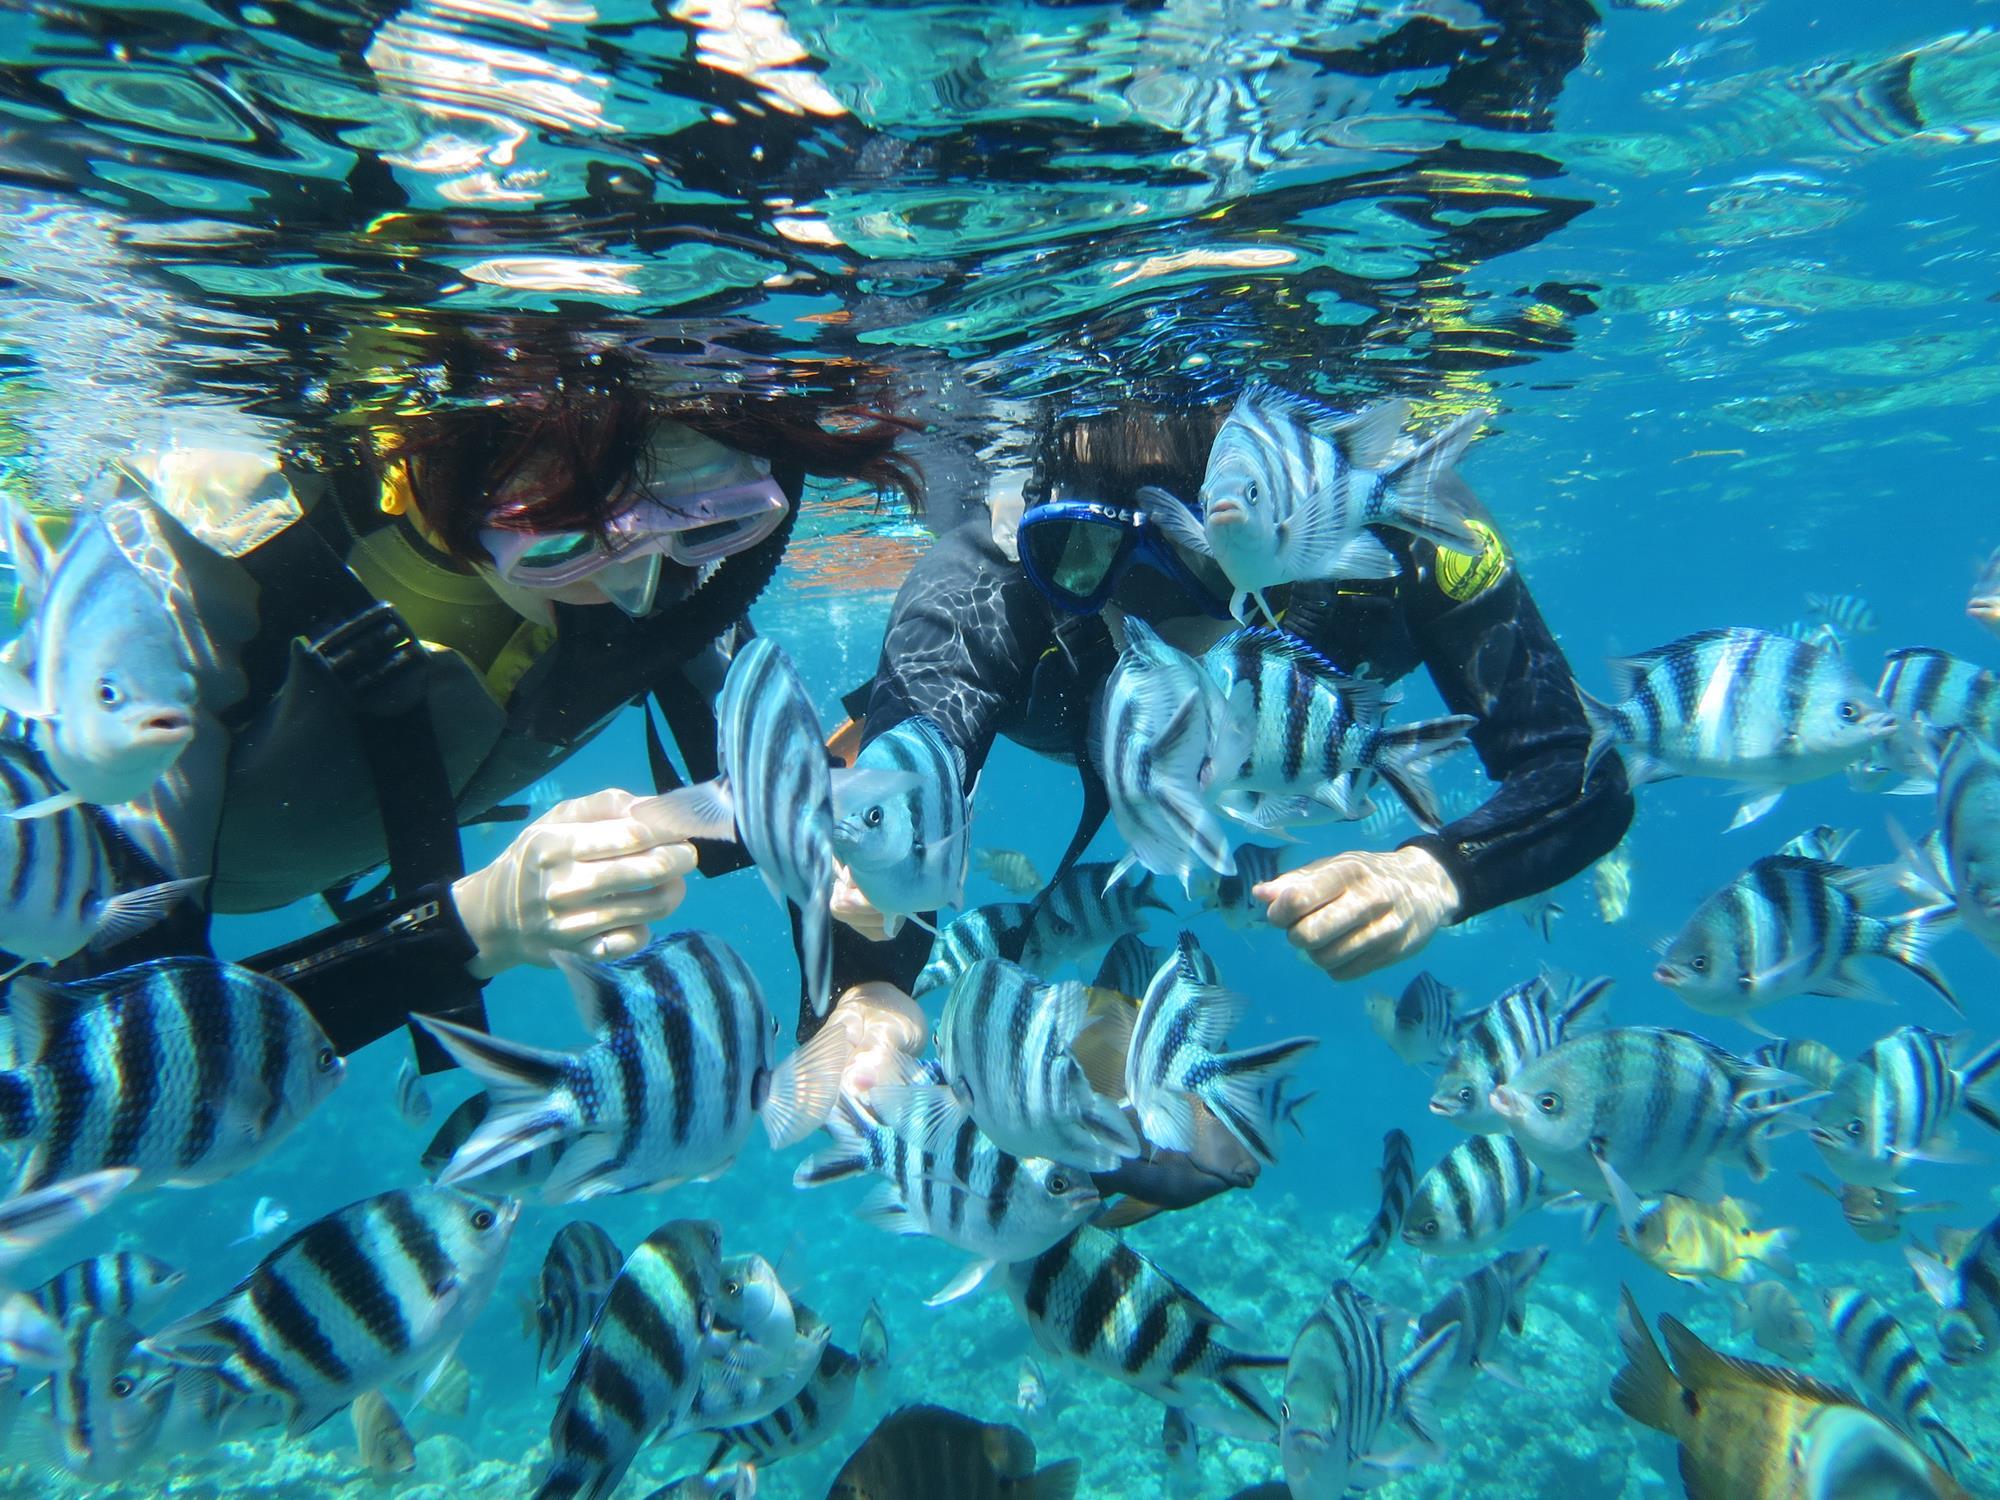 Blue Cave Snorkeling in Okinawa. 【Chartered Plan】